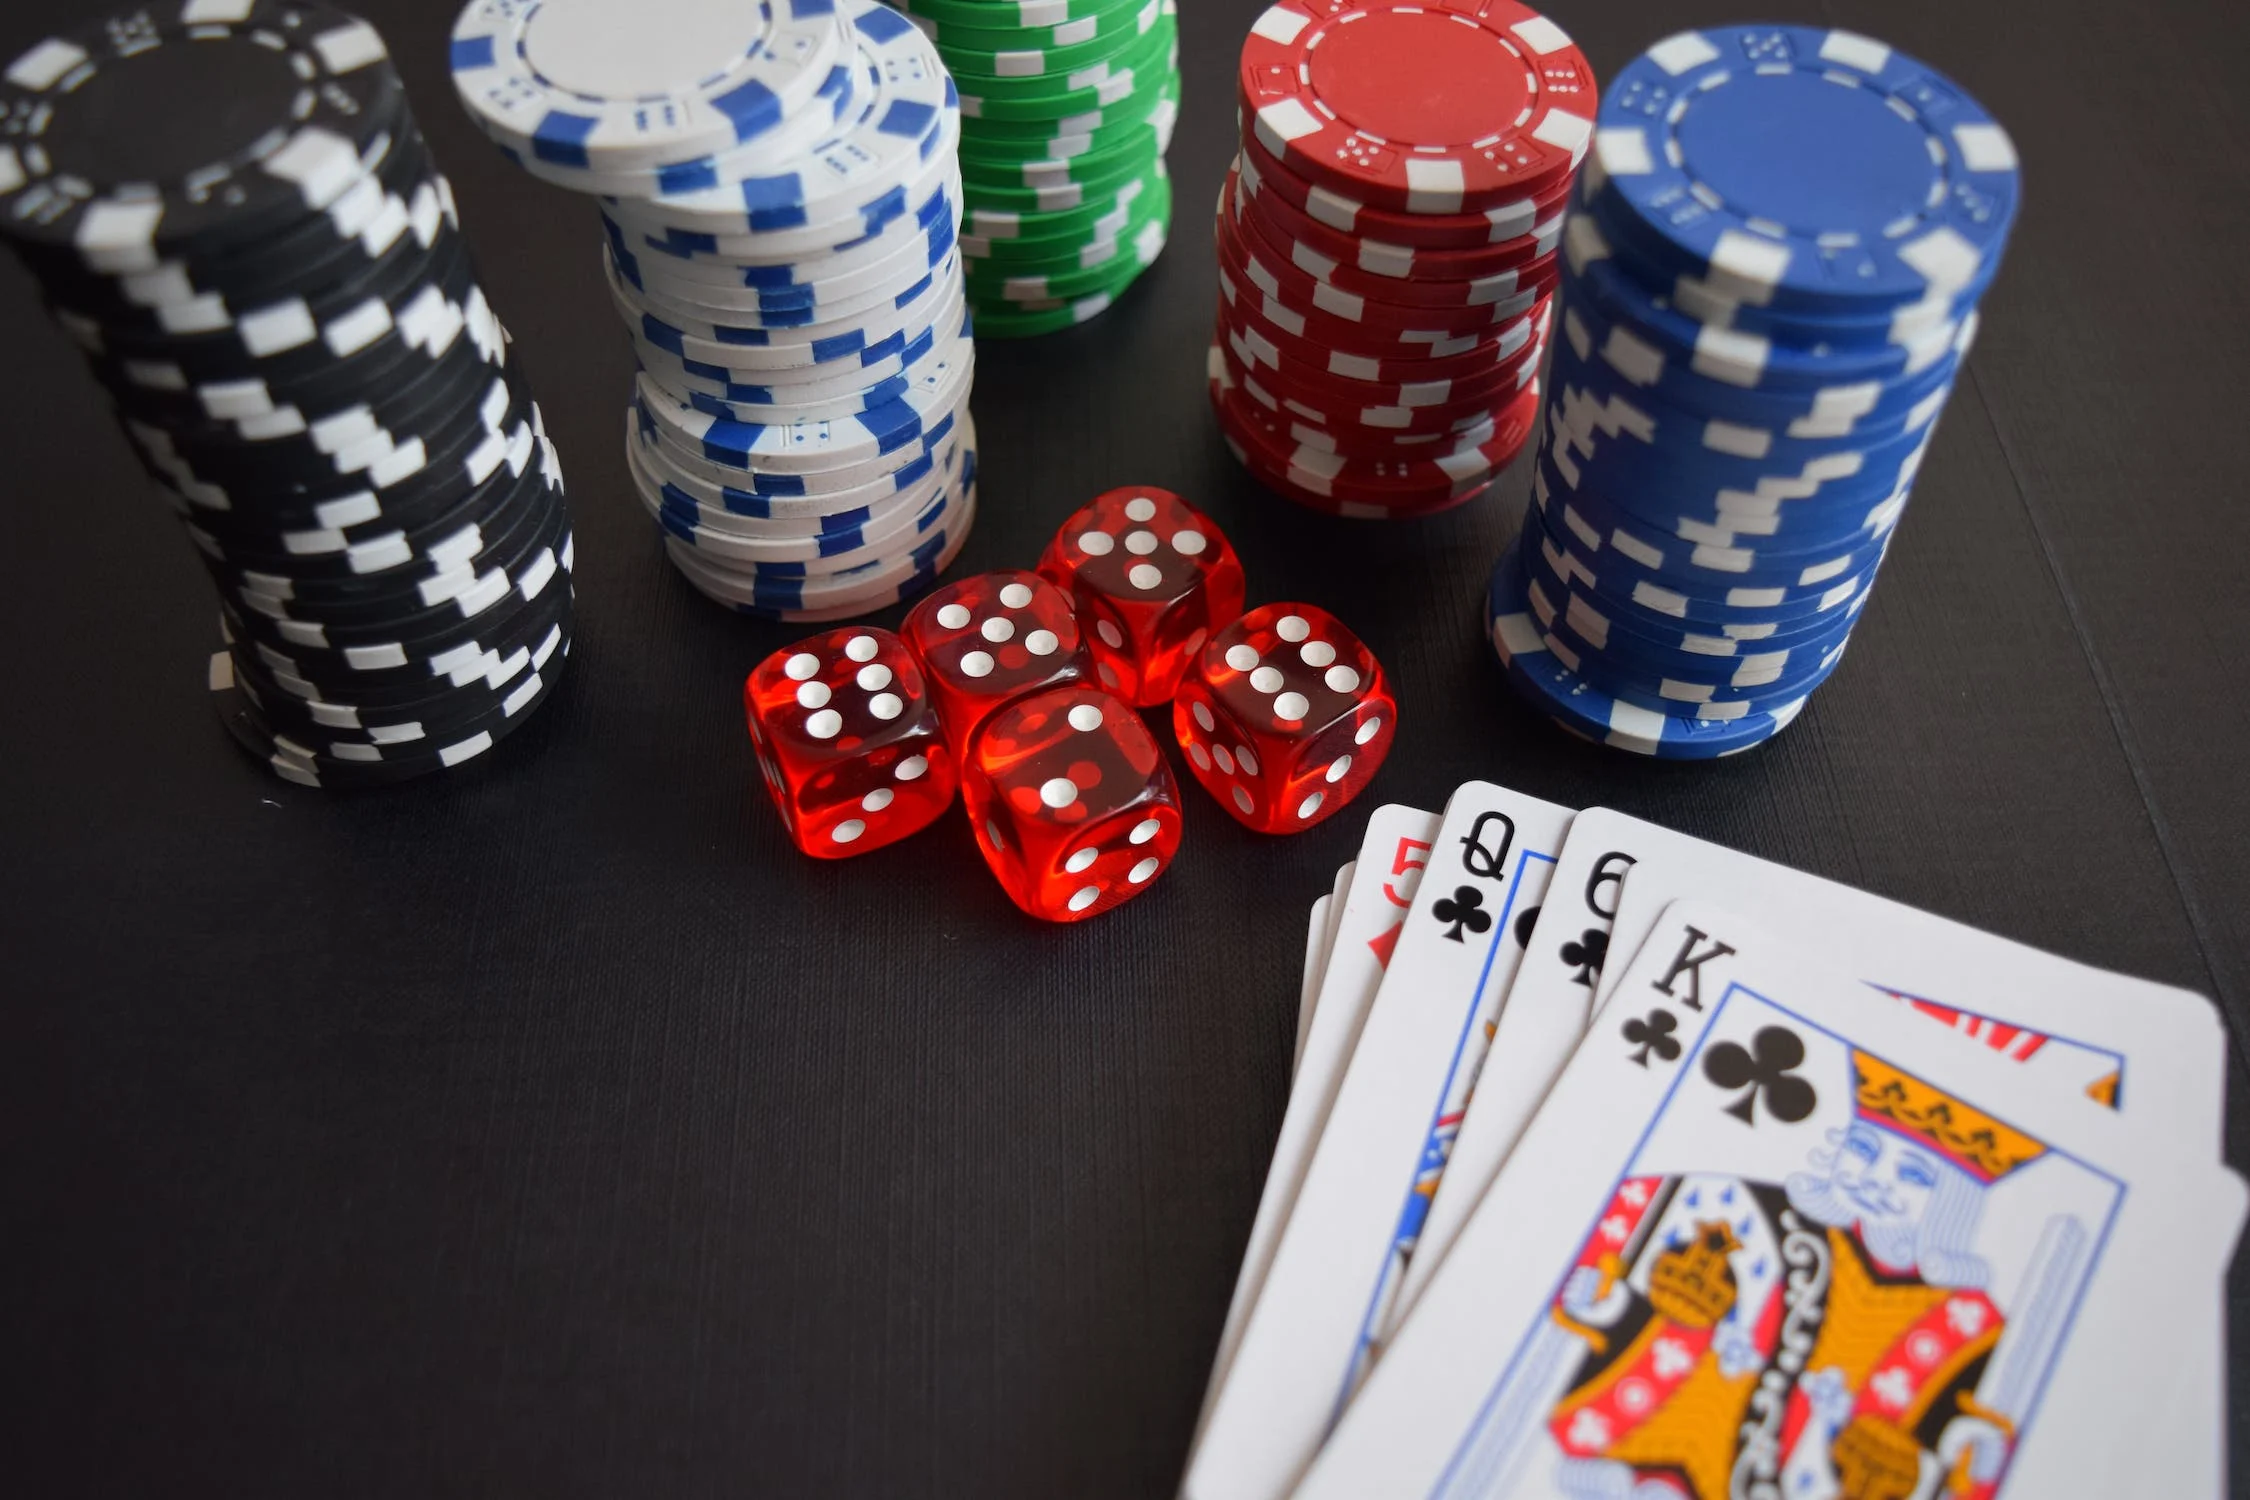 Traditional and online casinos: what are the differences?